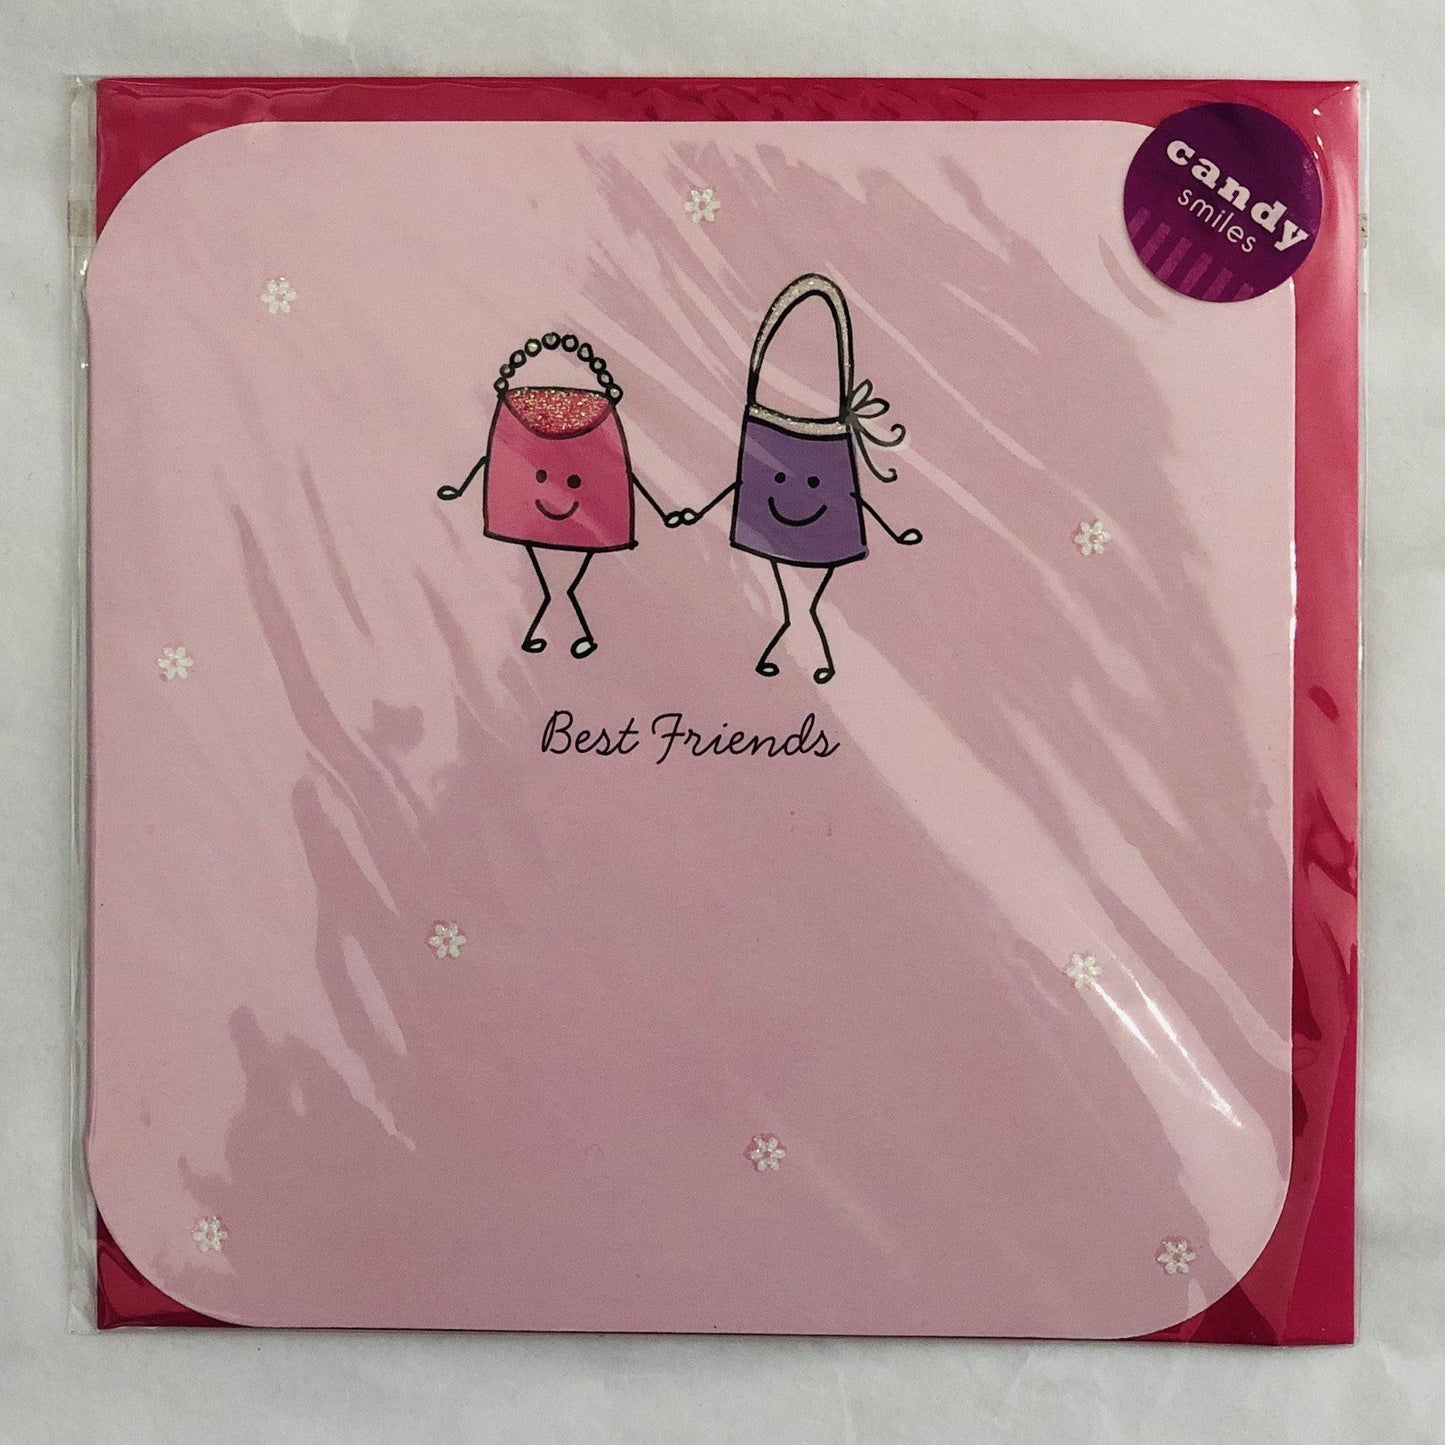 Best Friends Card | Oscar & Me | Baby & Children’s Clothing & Accessories